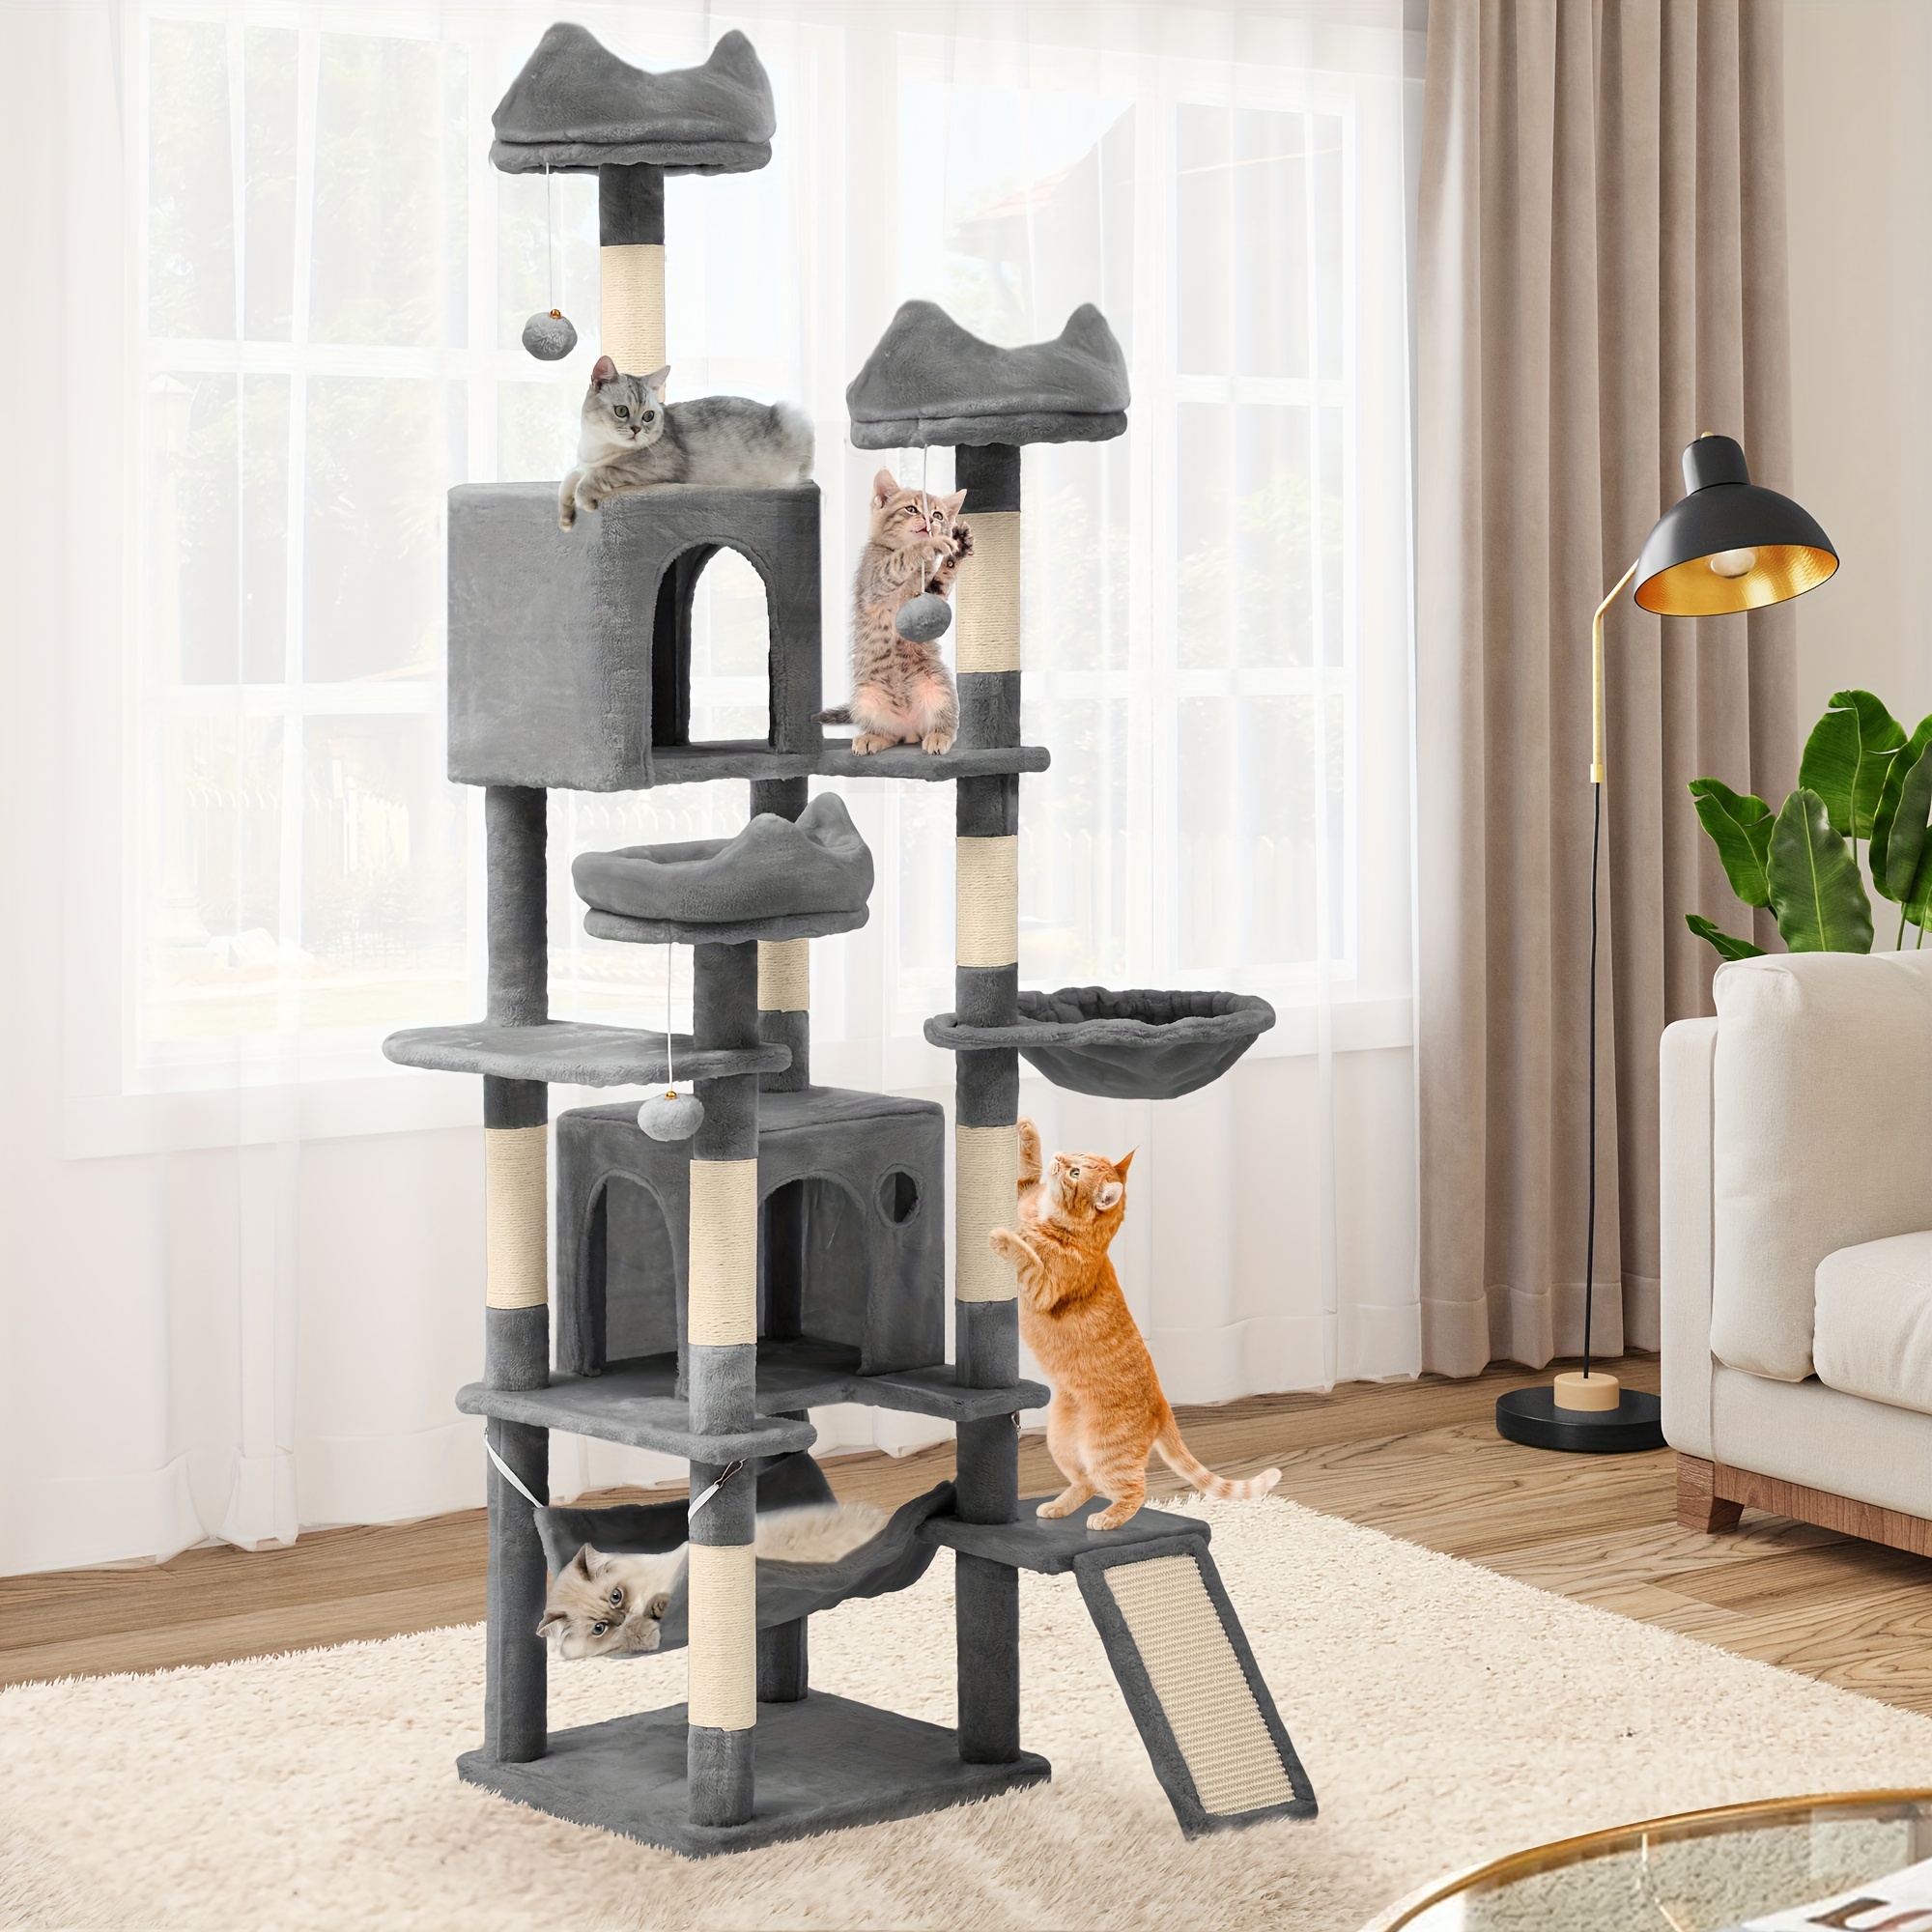 

Gardnfun 75" Multi- Level Cat Tree Tower With Cat Condos, Perches, Hammocks, Scratching Posts Board, Large Cat Activity Center, Light Grey